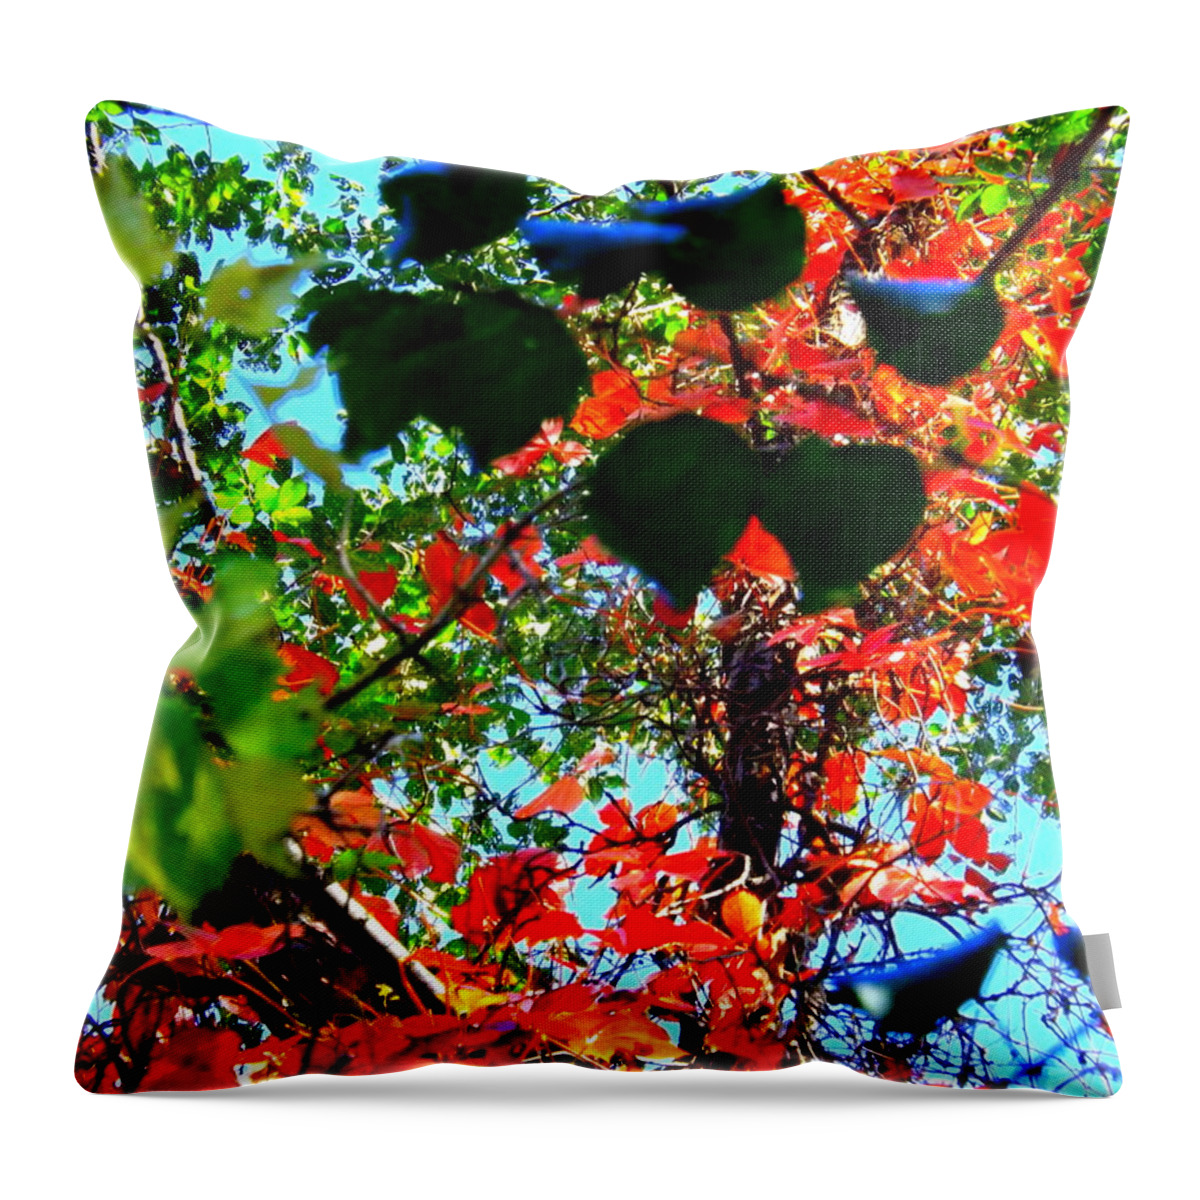 Red Creeper 3 Throw Pillow featuring the photograph Red Creeper 3 by Darren Robinson